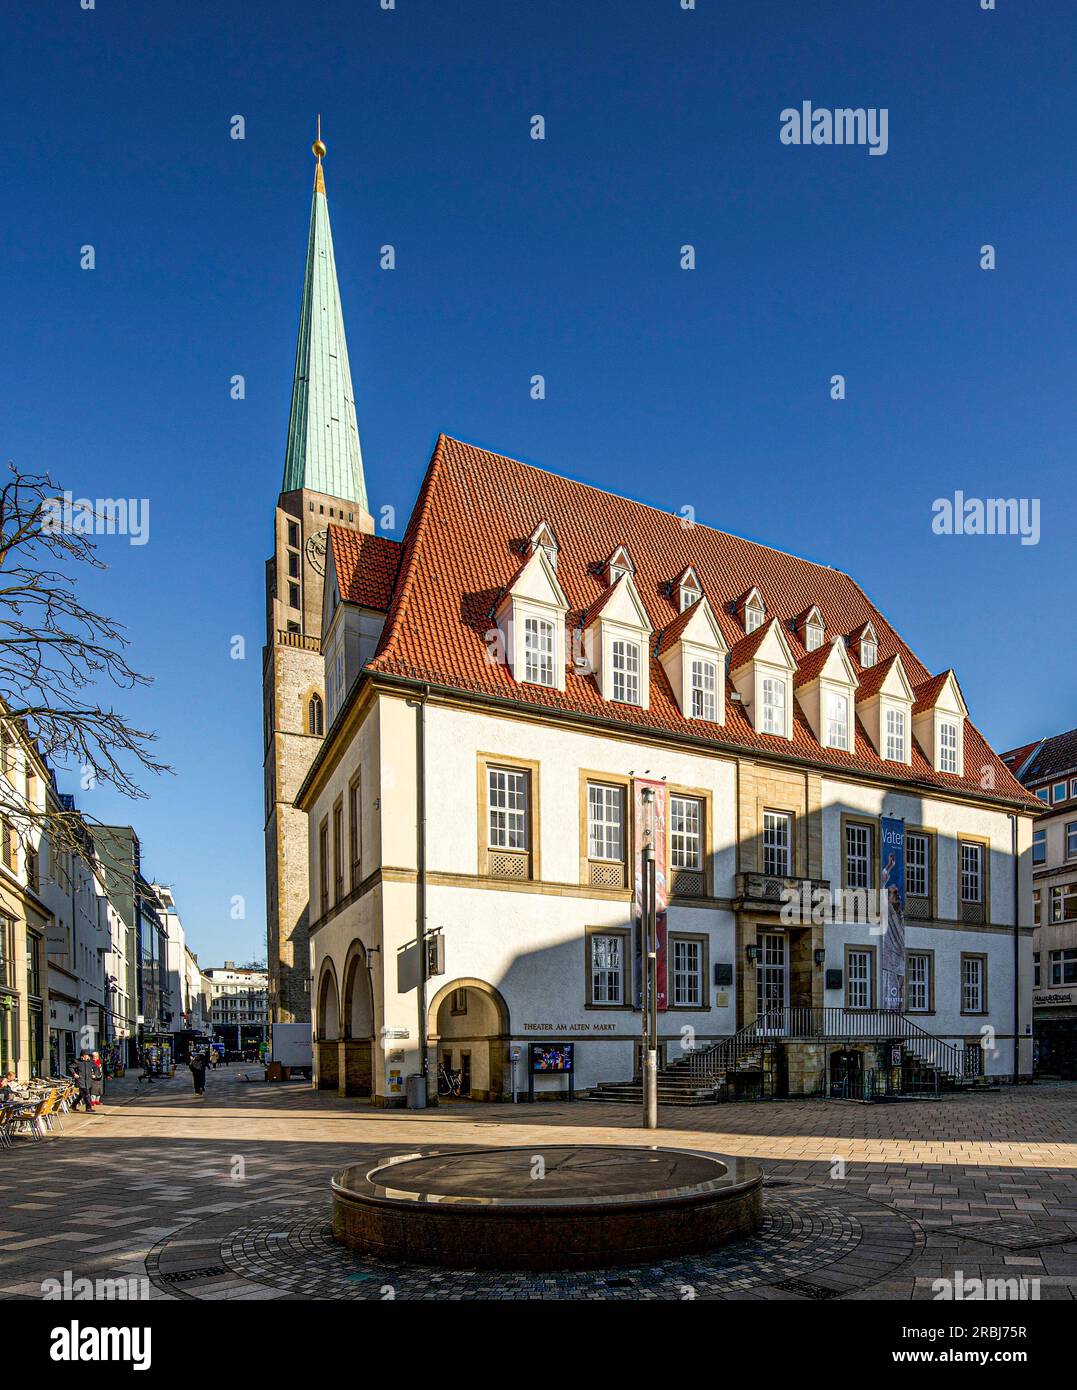 Theater am Alten Markt, in the background the old town Nicolaikirche, old town of Bielefeld, Teutoburg Forest, North Rhine-Westphalia, Germany Stock Photo